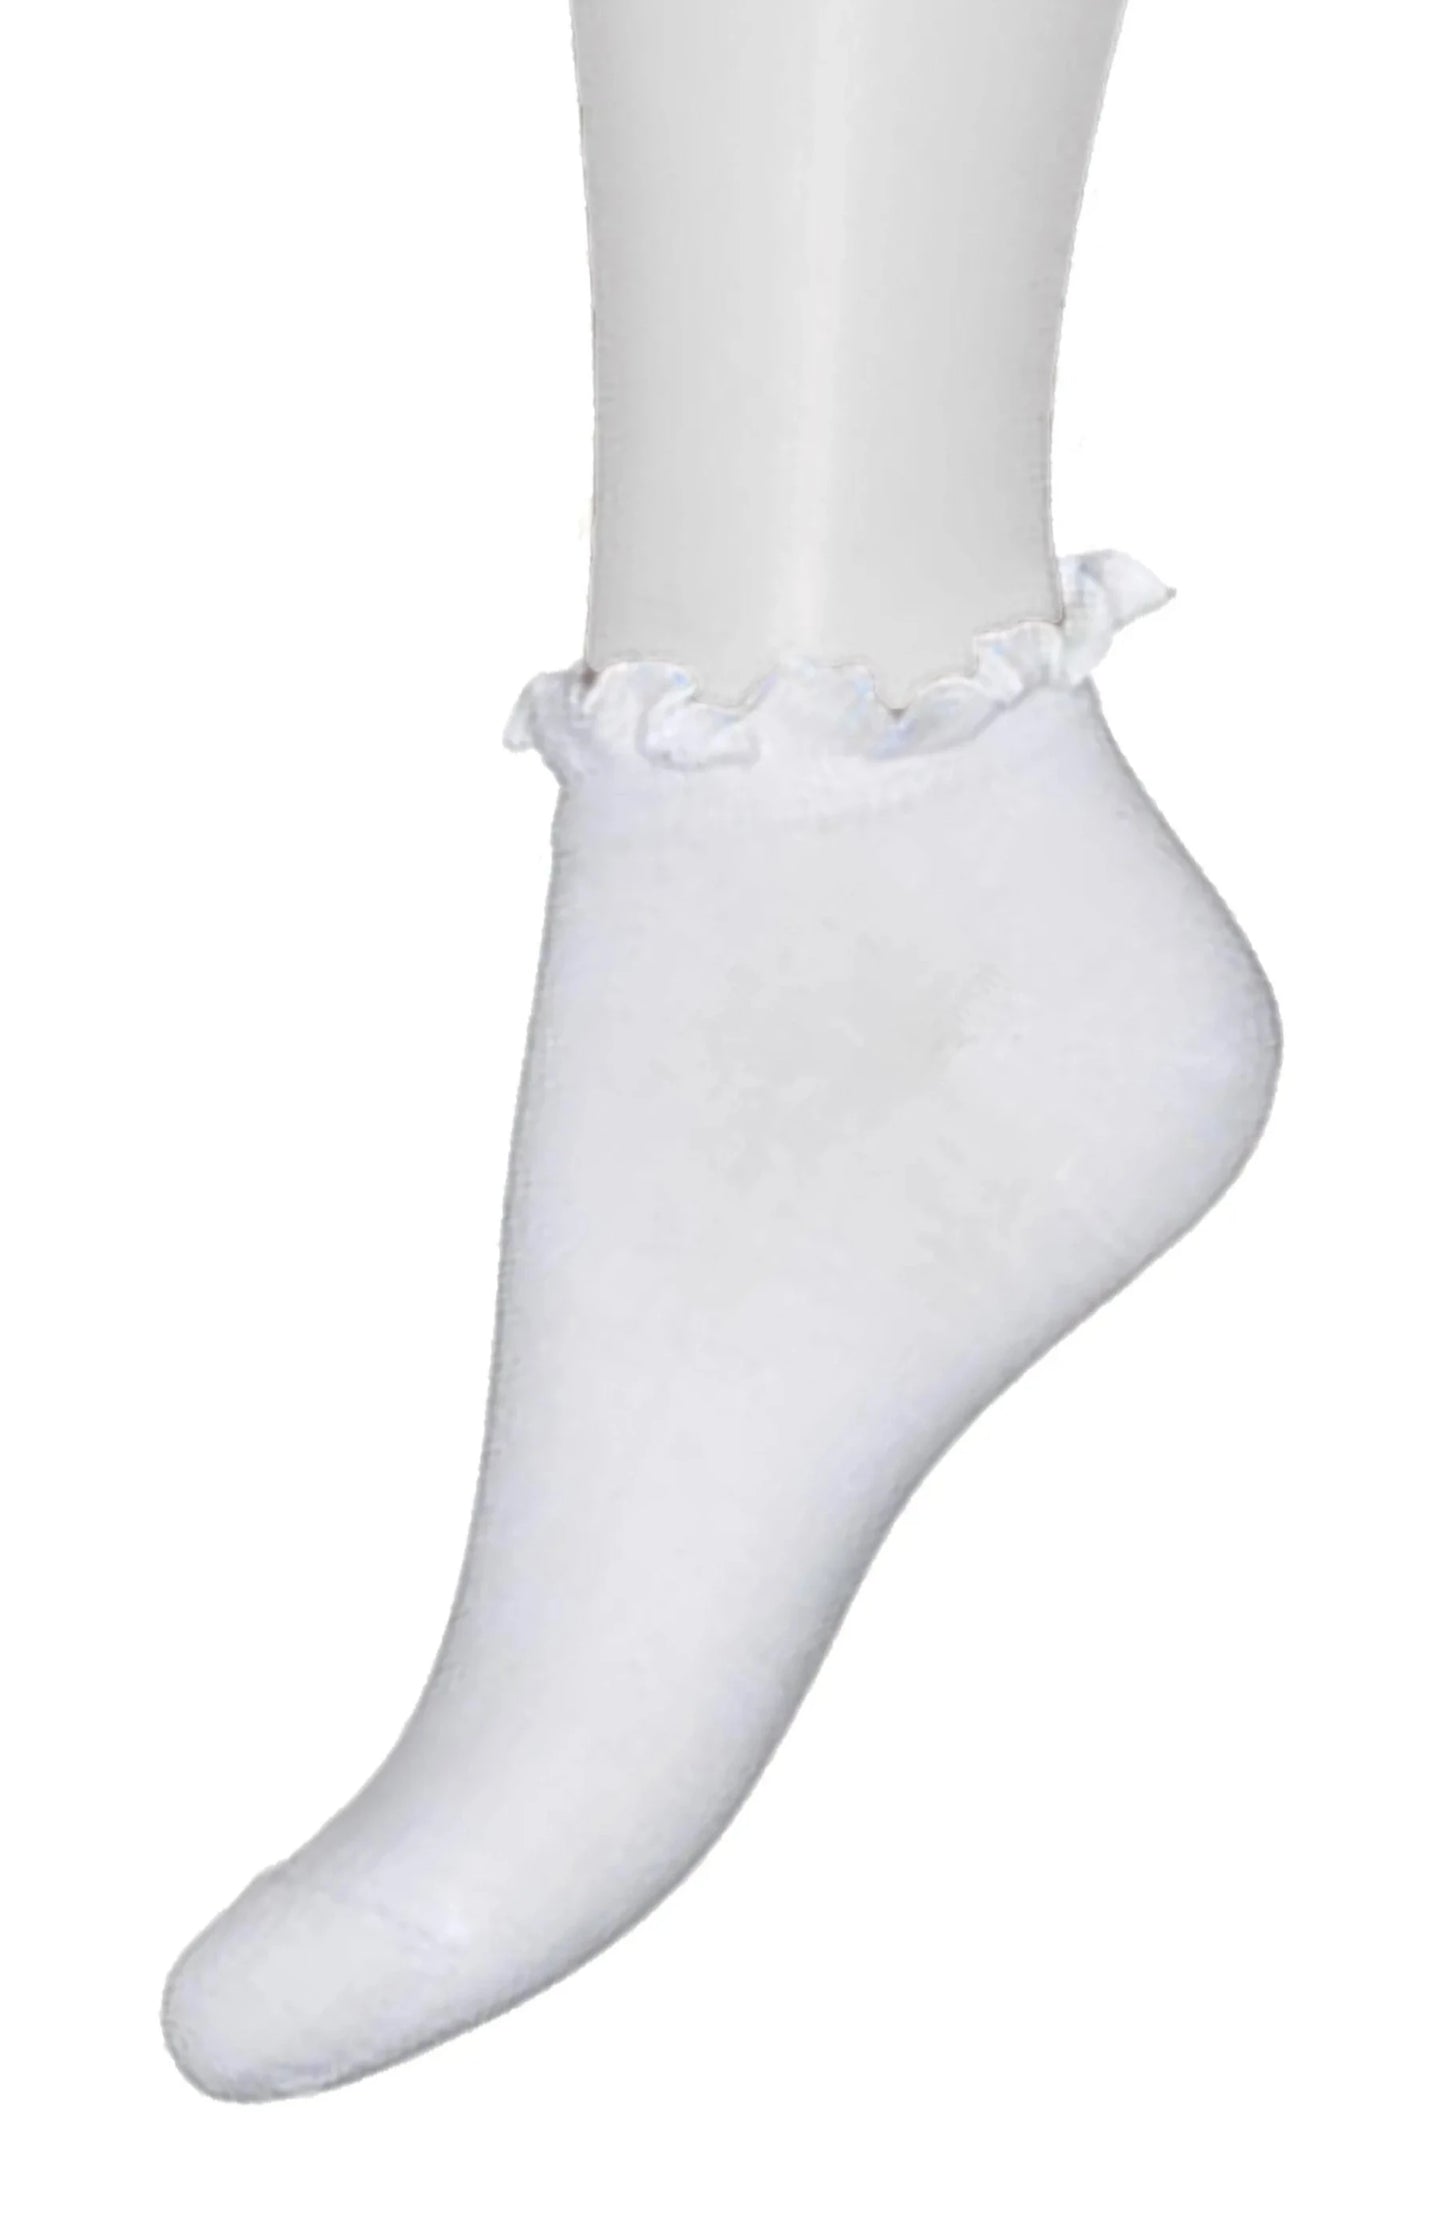 Bonnie Doon BN34.10.19 Lettuce Sock - white low rise cotton ankle socks with frill cuff